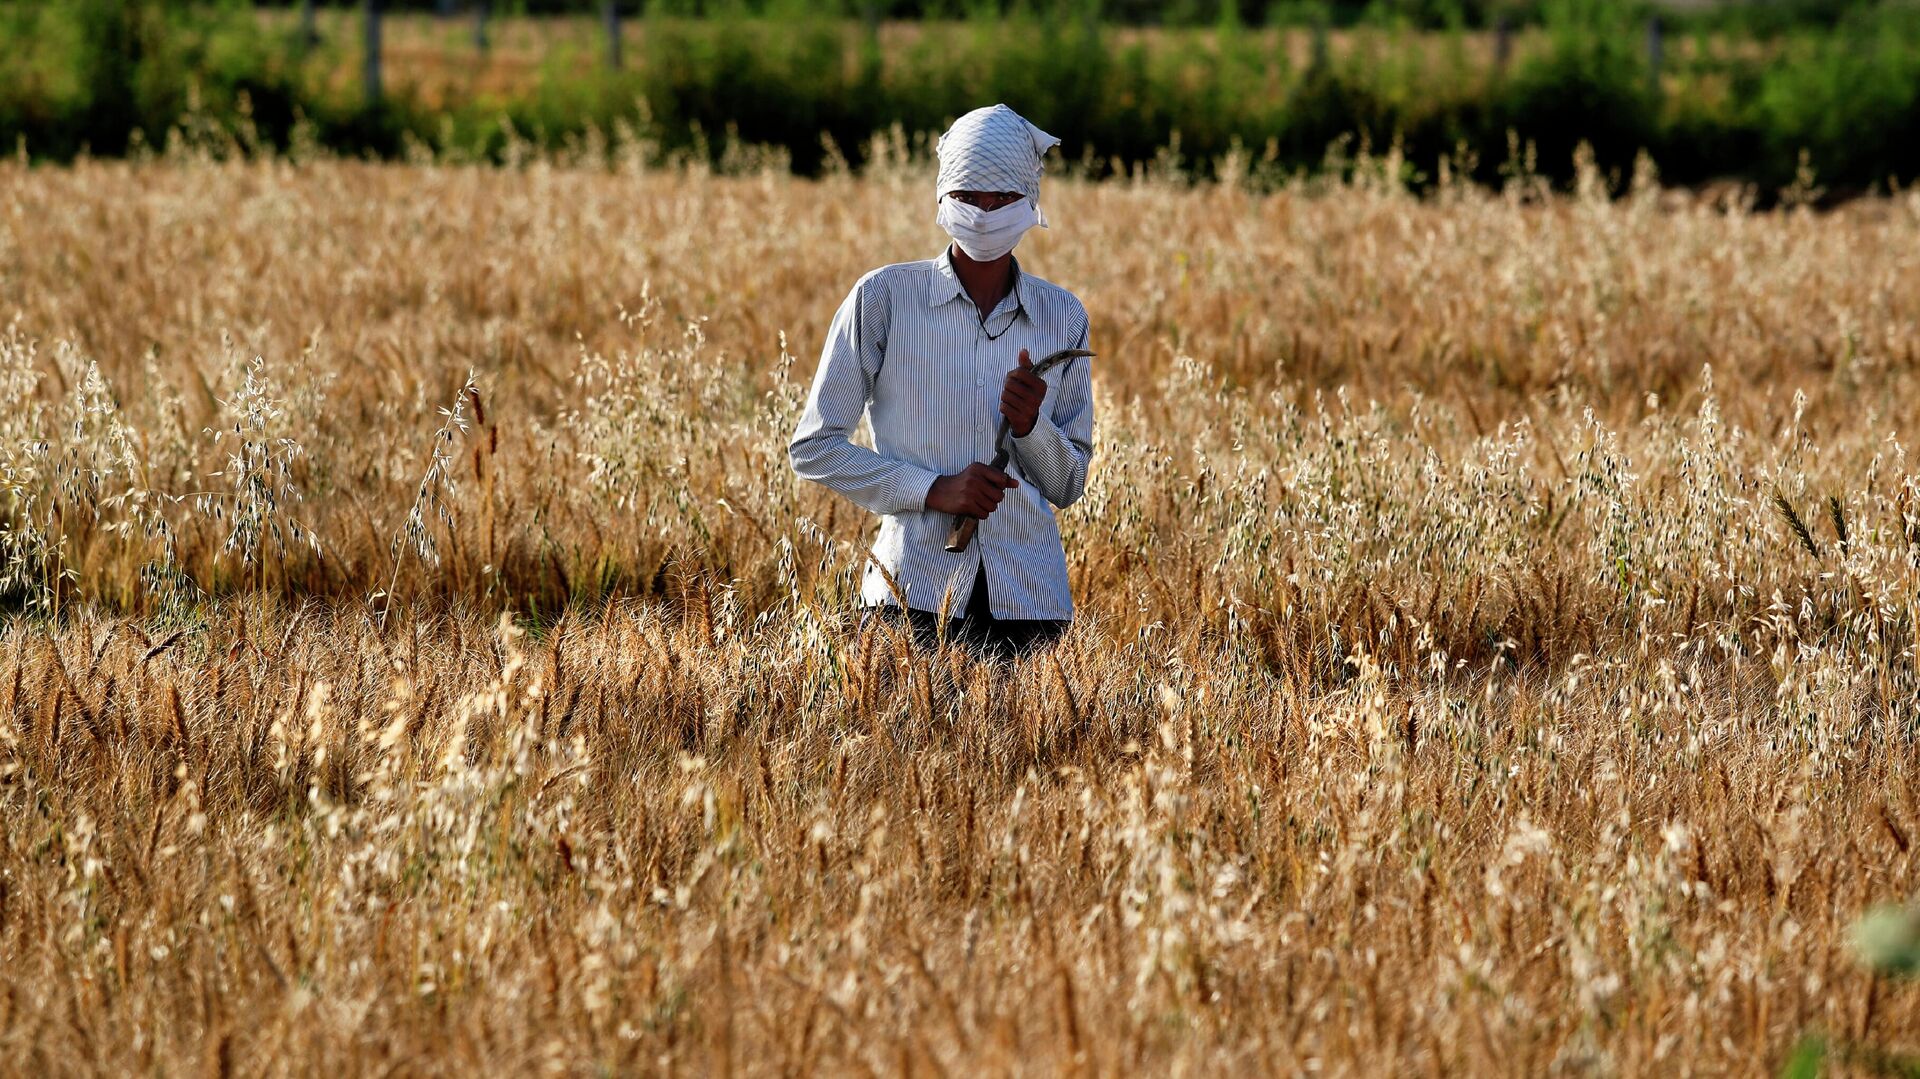 A villager with his face covered with cloth amid concerns over the spread of coronavirus, stands in a wheat field during harvesting time in Uttarchata village in the Indian state of Uttar Pradesh, Saturday, April 4, 2020 - Sputnik International, 1920, 25.05.2022